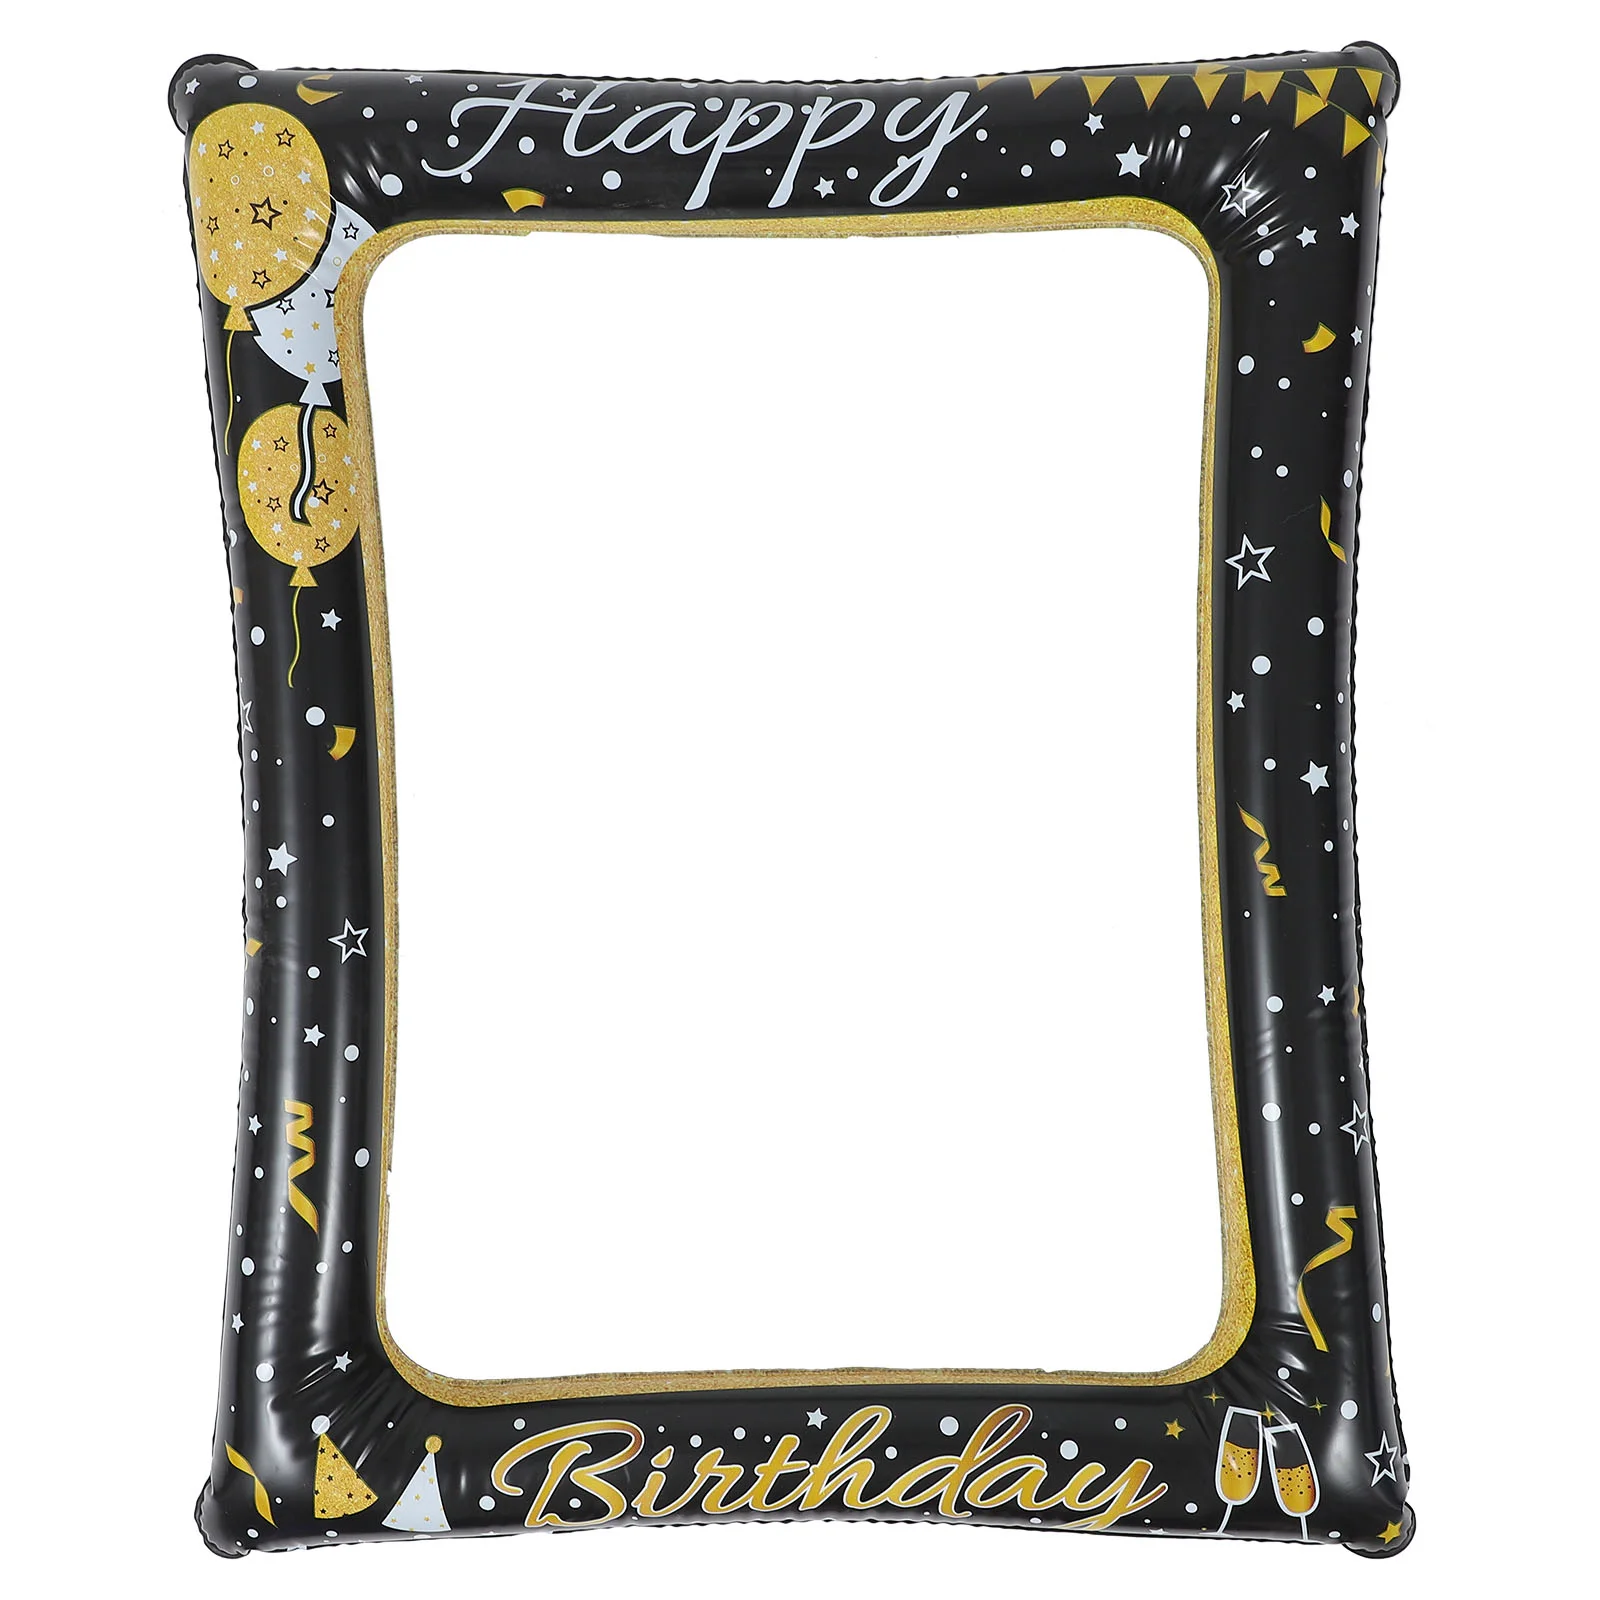 

Photo Booth Frame Floating Pvc Picture Ornament Frames Inflatable Selfie Props Birthday Decorative Photobooth